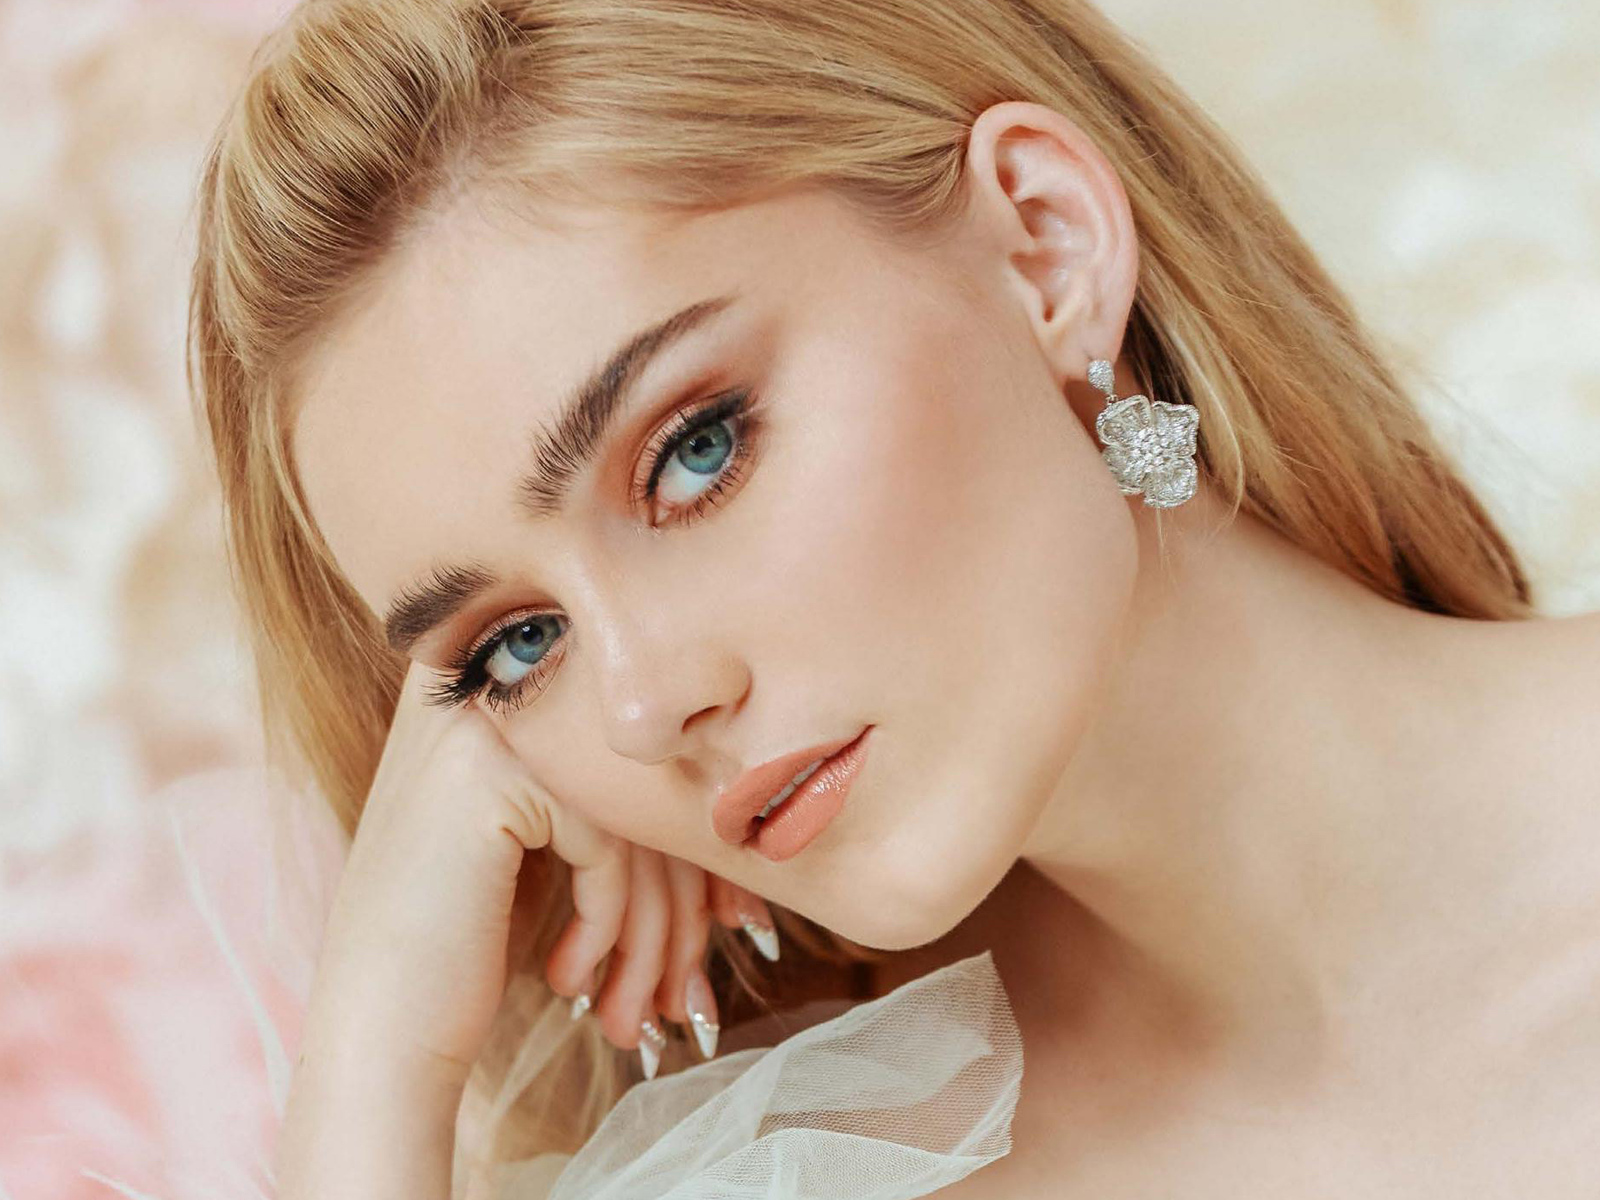 celebrities-wallpapers. meg-donnelly-wallpapers. photoshoot-wallpapers. gir...